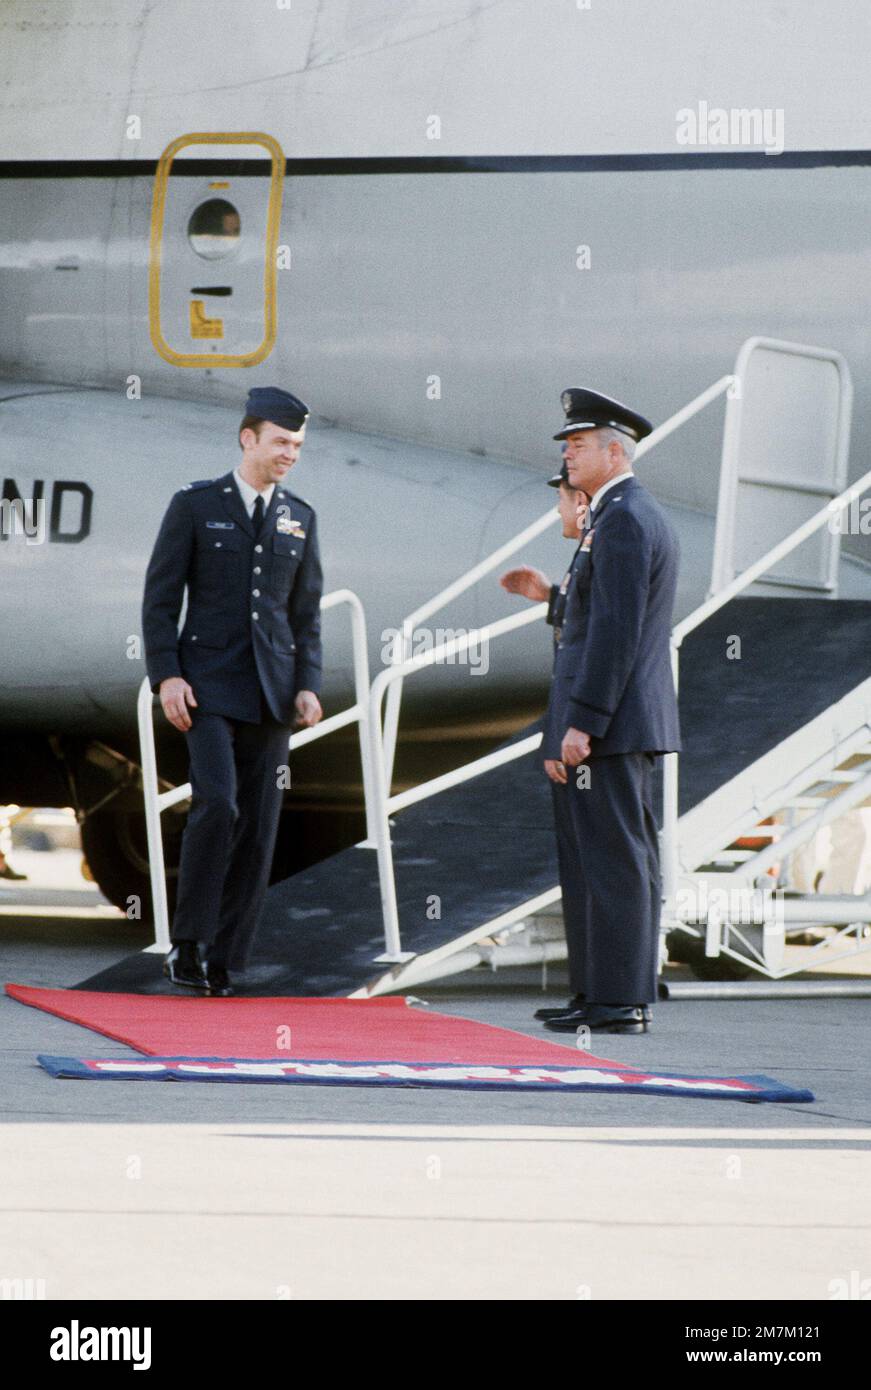 Former POW and U.S. Air Force CPT Darrel Edwin Pyle is greeted by MGEN John Gonge, Commander 22nd Air Force and BGEN Ralph Saunders after his arrival from Clark Air Base, Philippines. CPT Pyle was captured on 13 Jun 66 and released by the North Vietnamese in Hanoi on 12 Feb 73. Subject Operation/Series: HOMECOMING Base: Travis Air Force Base State: California (CA) Country: United States Of America (USA) Stock Photo